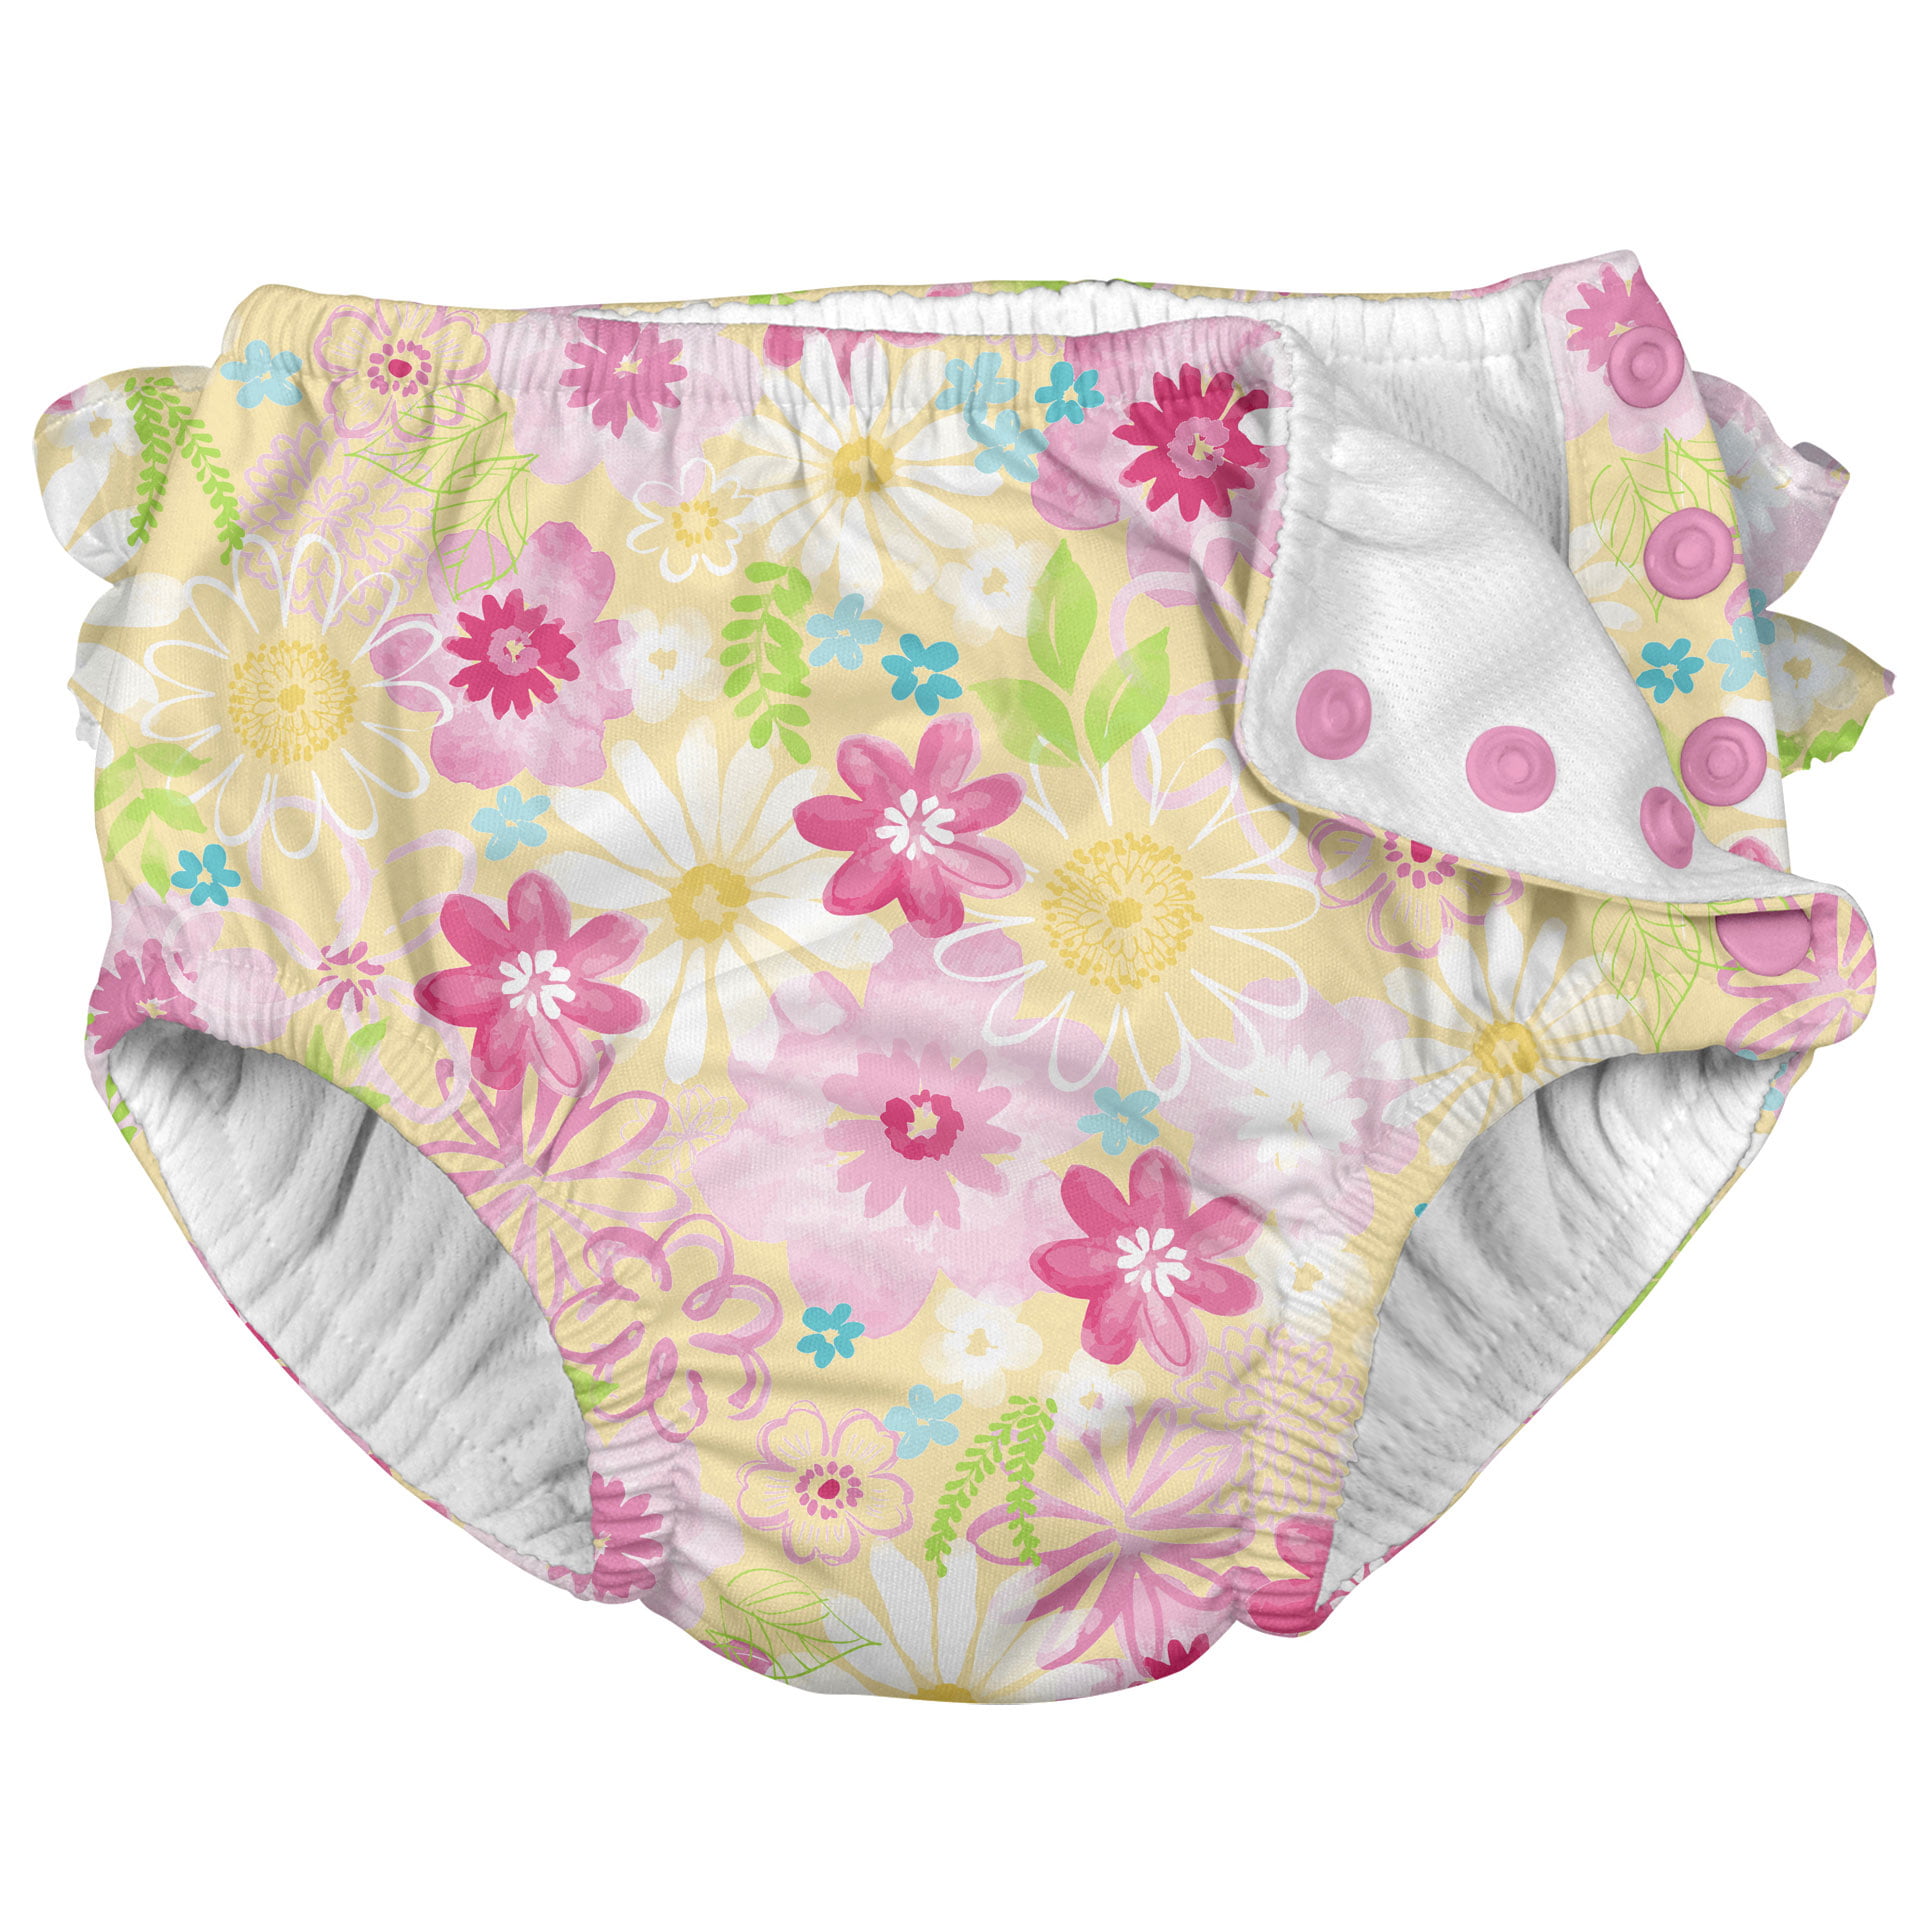 2 Pack Girls Reusable Absorbent Leakproof Swimming Baby Swim Diapers Watercolor Floral and Hot Pink 6 Months i play 